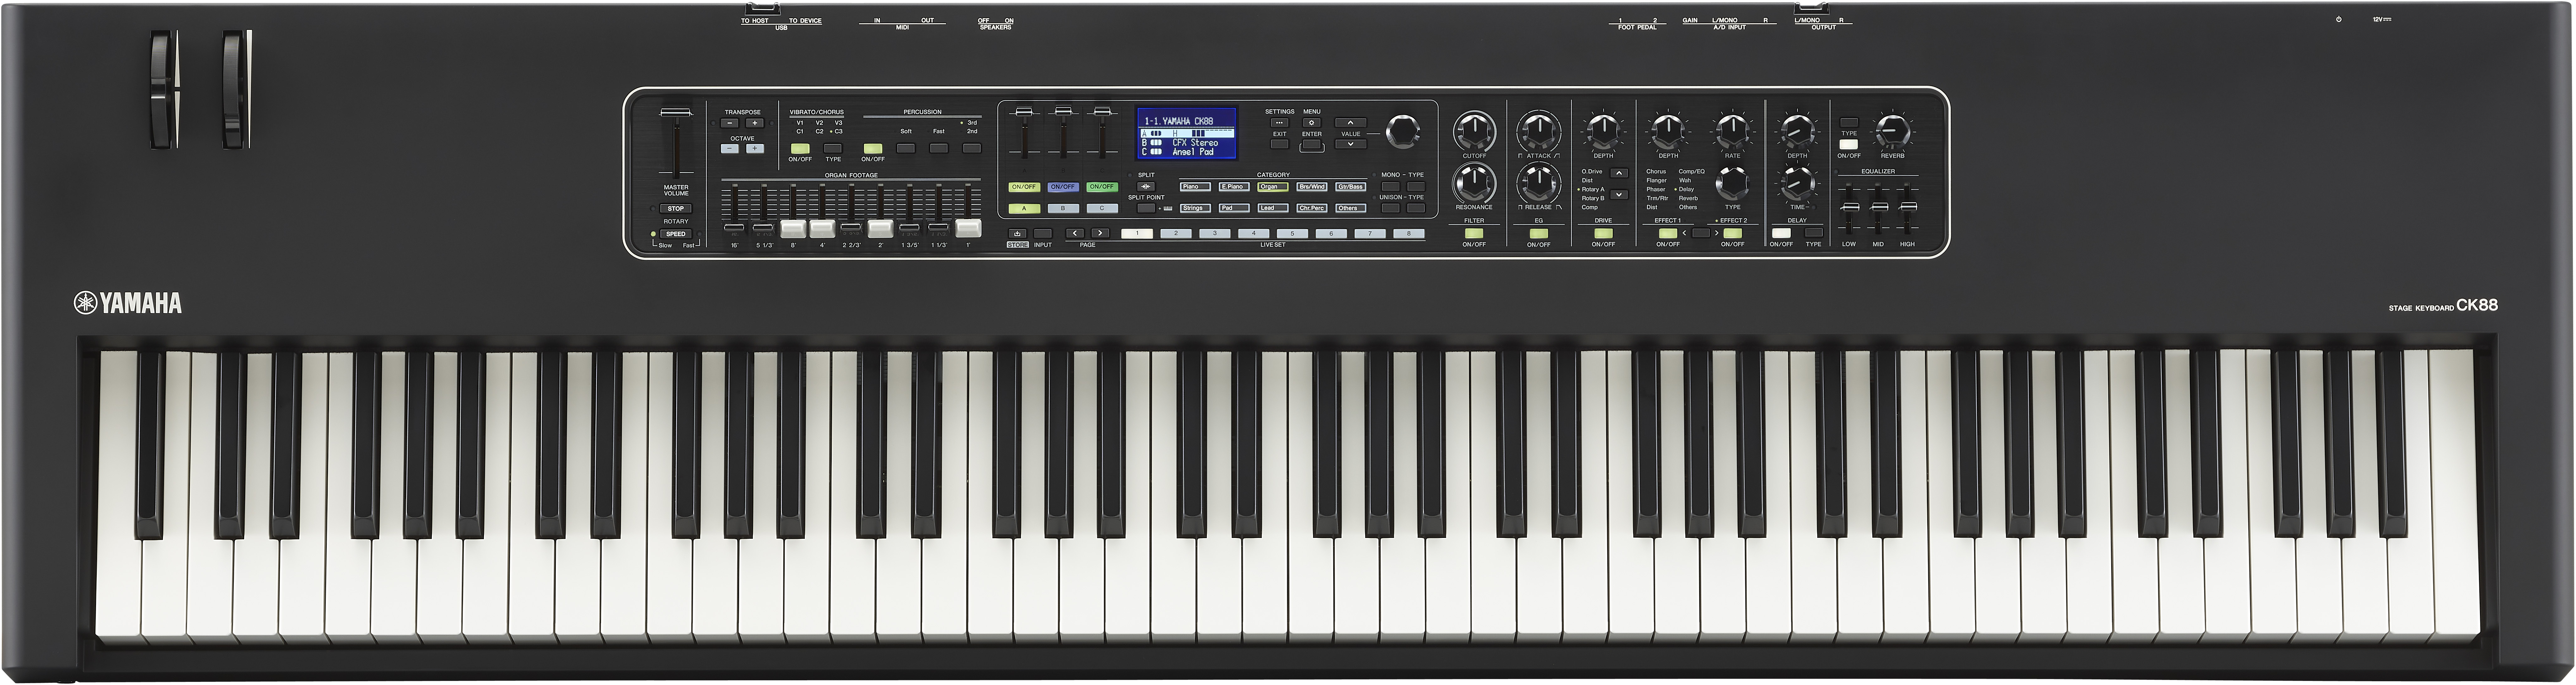 Yamaha Ck 88 - Stagepiano - Main picture